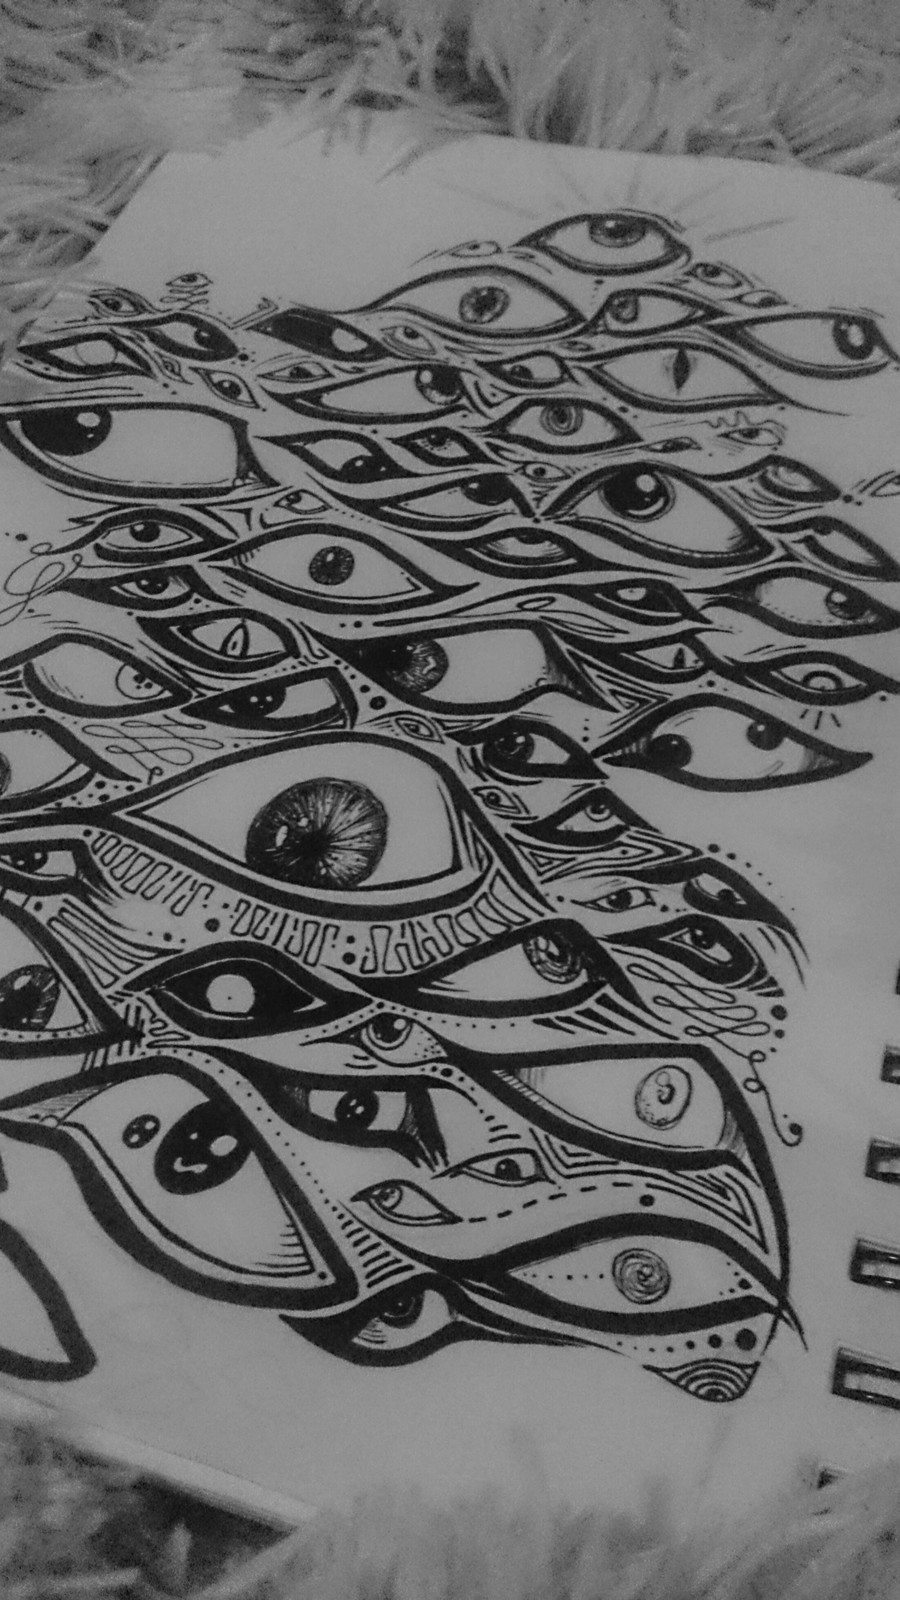 all seeing eye(s).